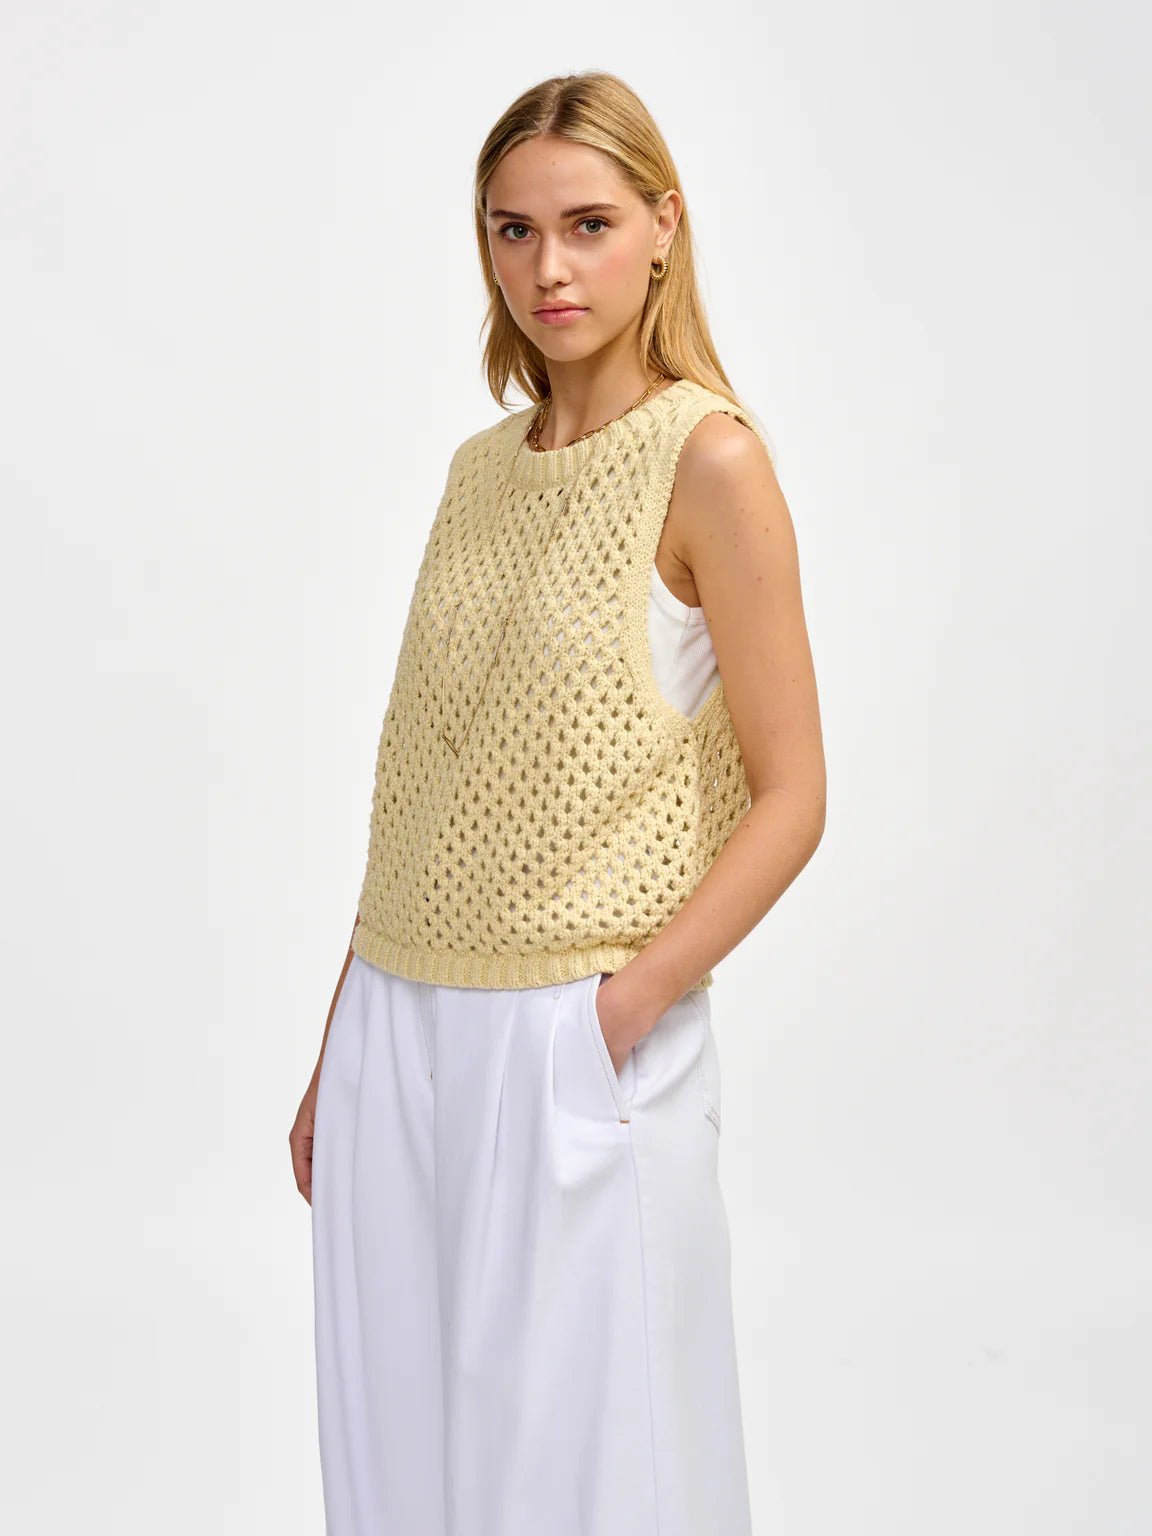 BELLEROSE - ATYOW KNIT TOP - Annabelle 87